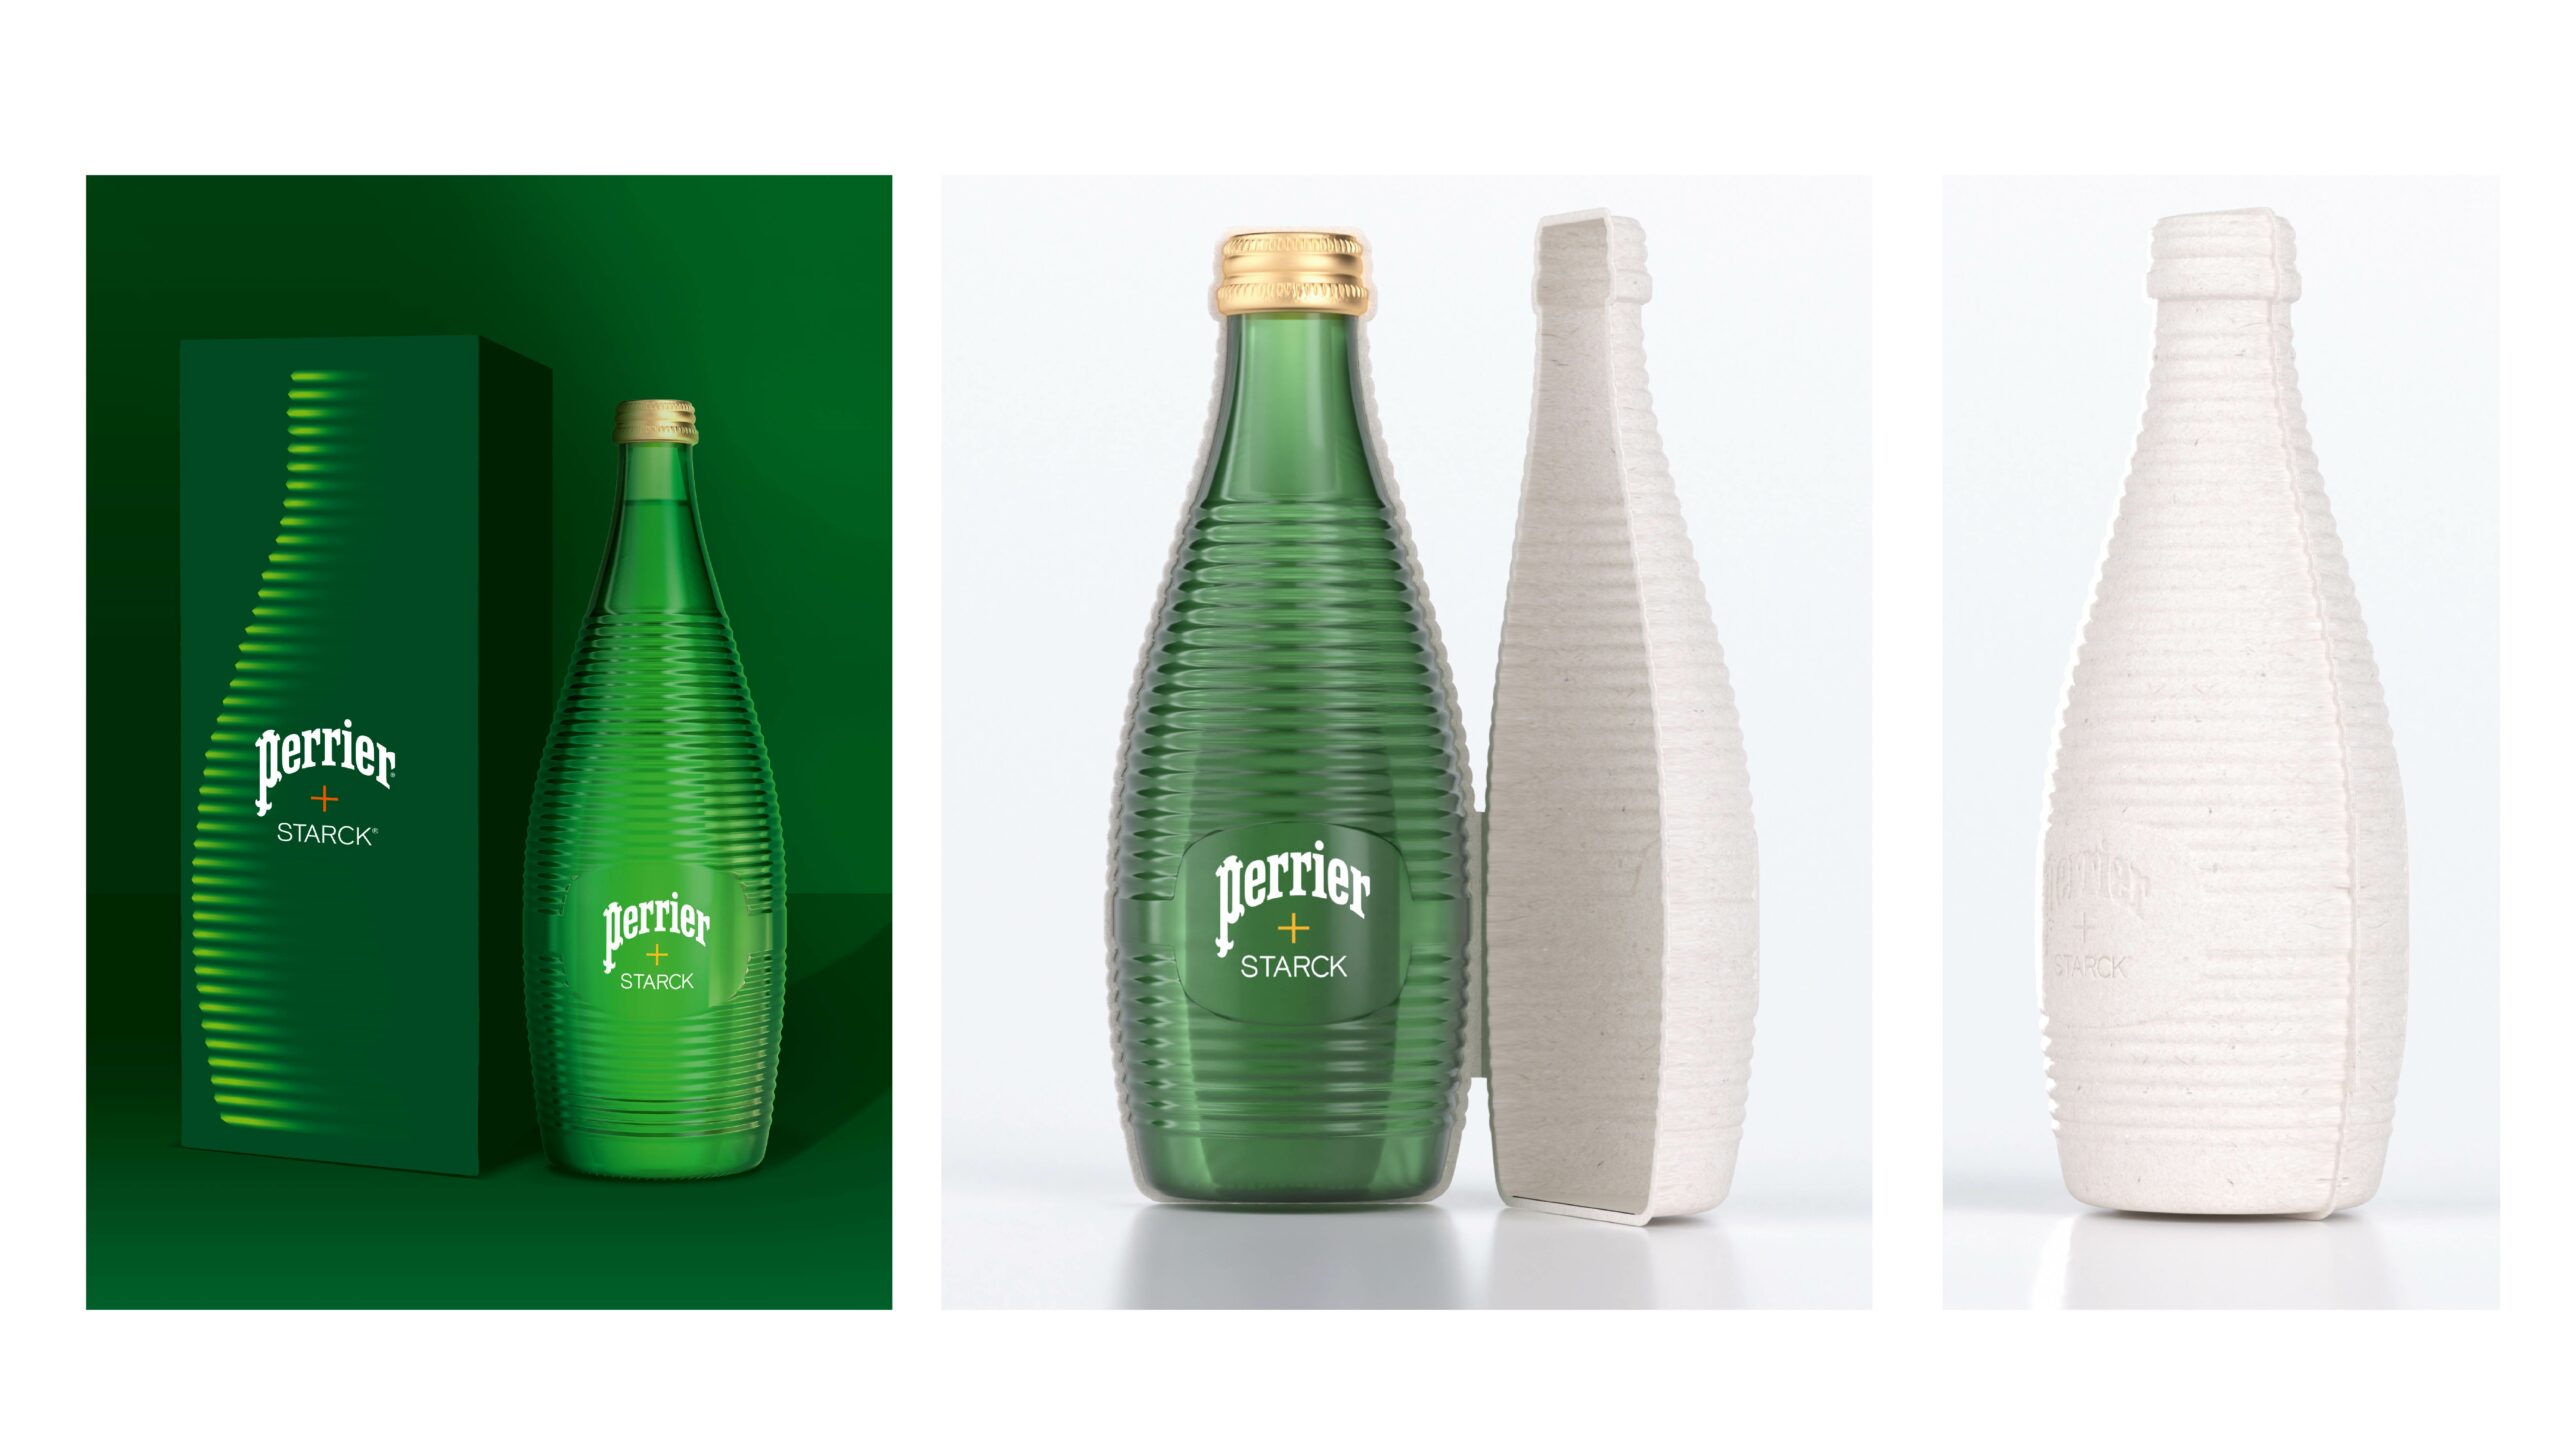 PERRIER STARCK CASE STUDY AnC 231121 PAGE 6 scaled